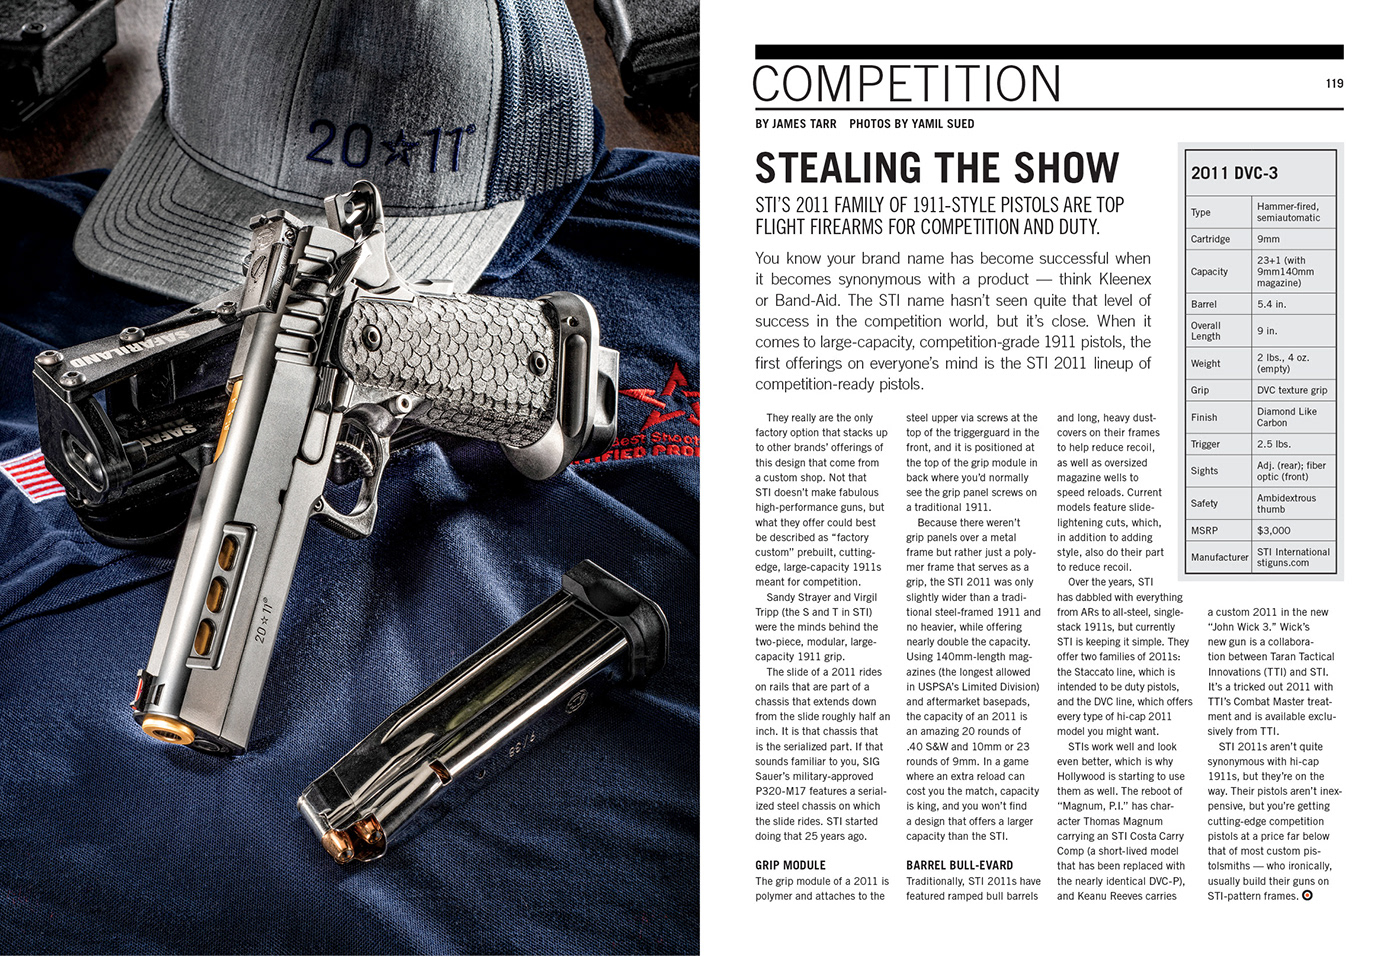 Competition shooting guns Firearms magazine